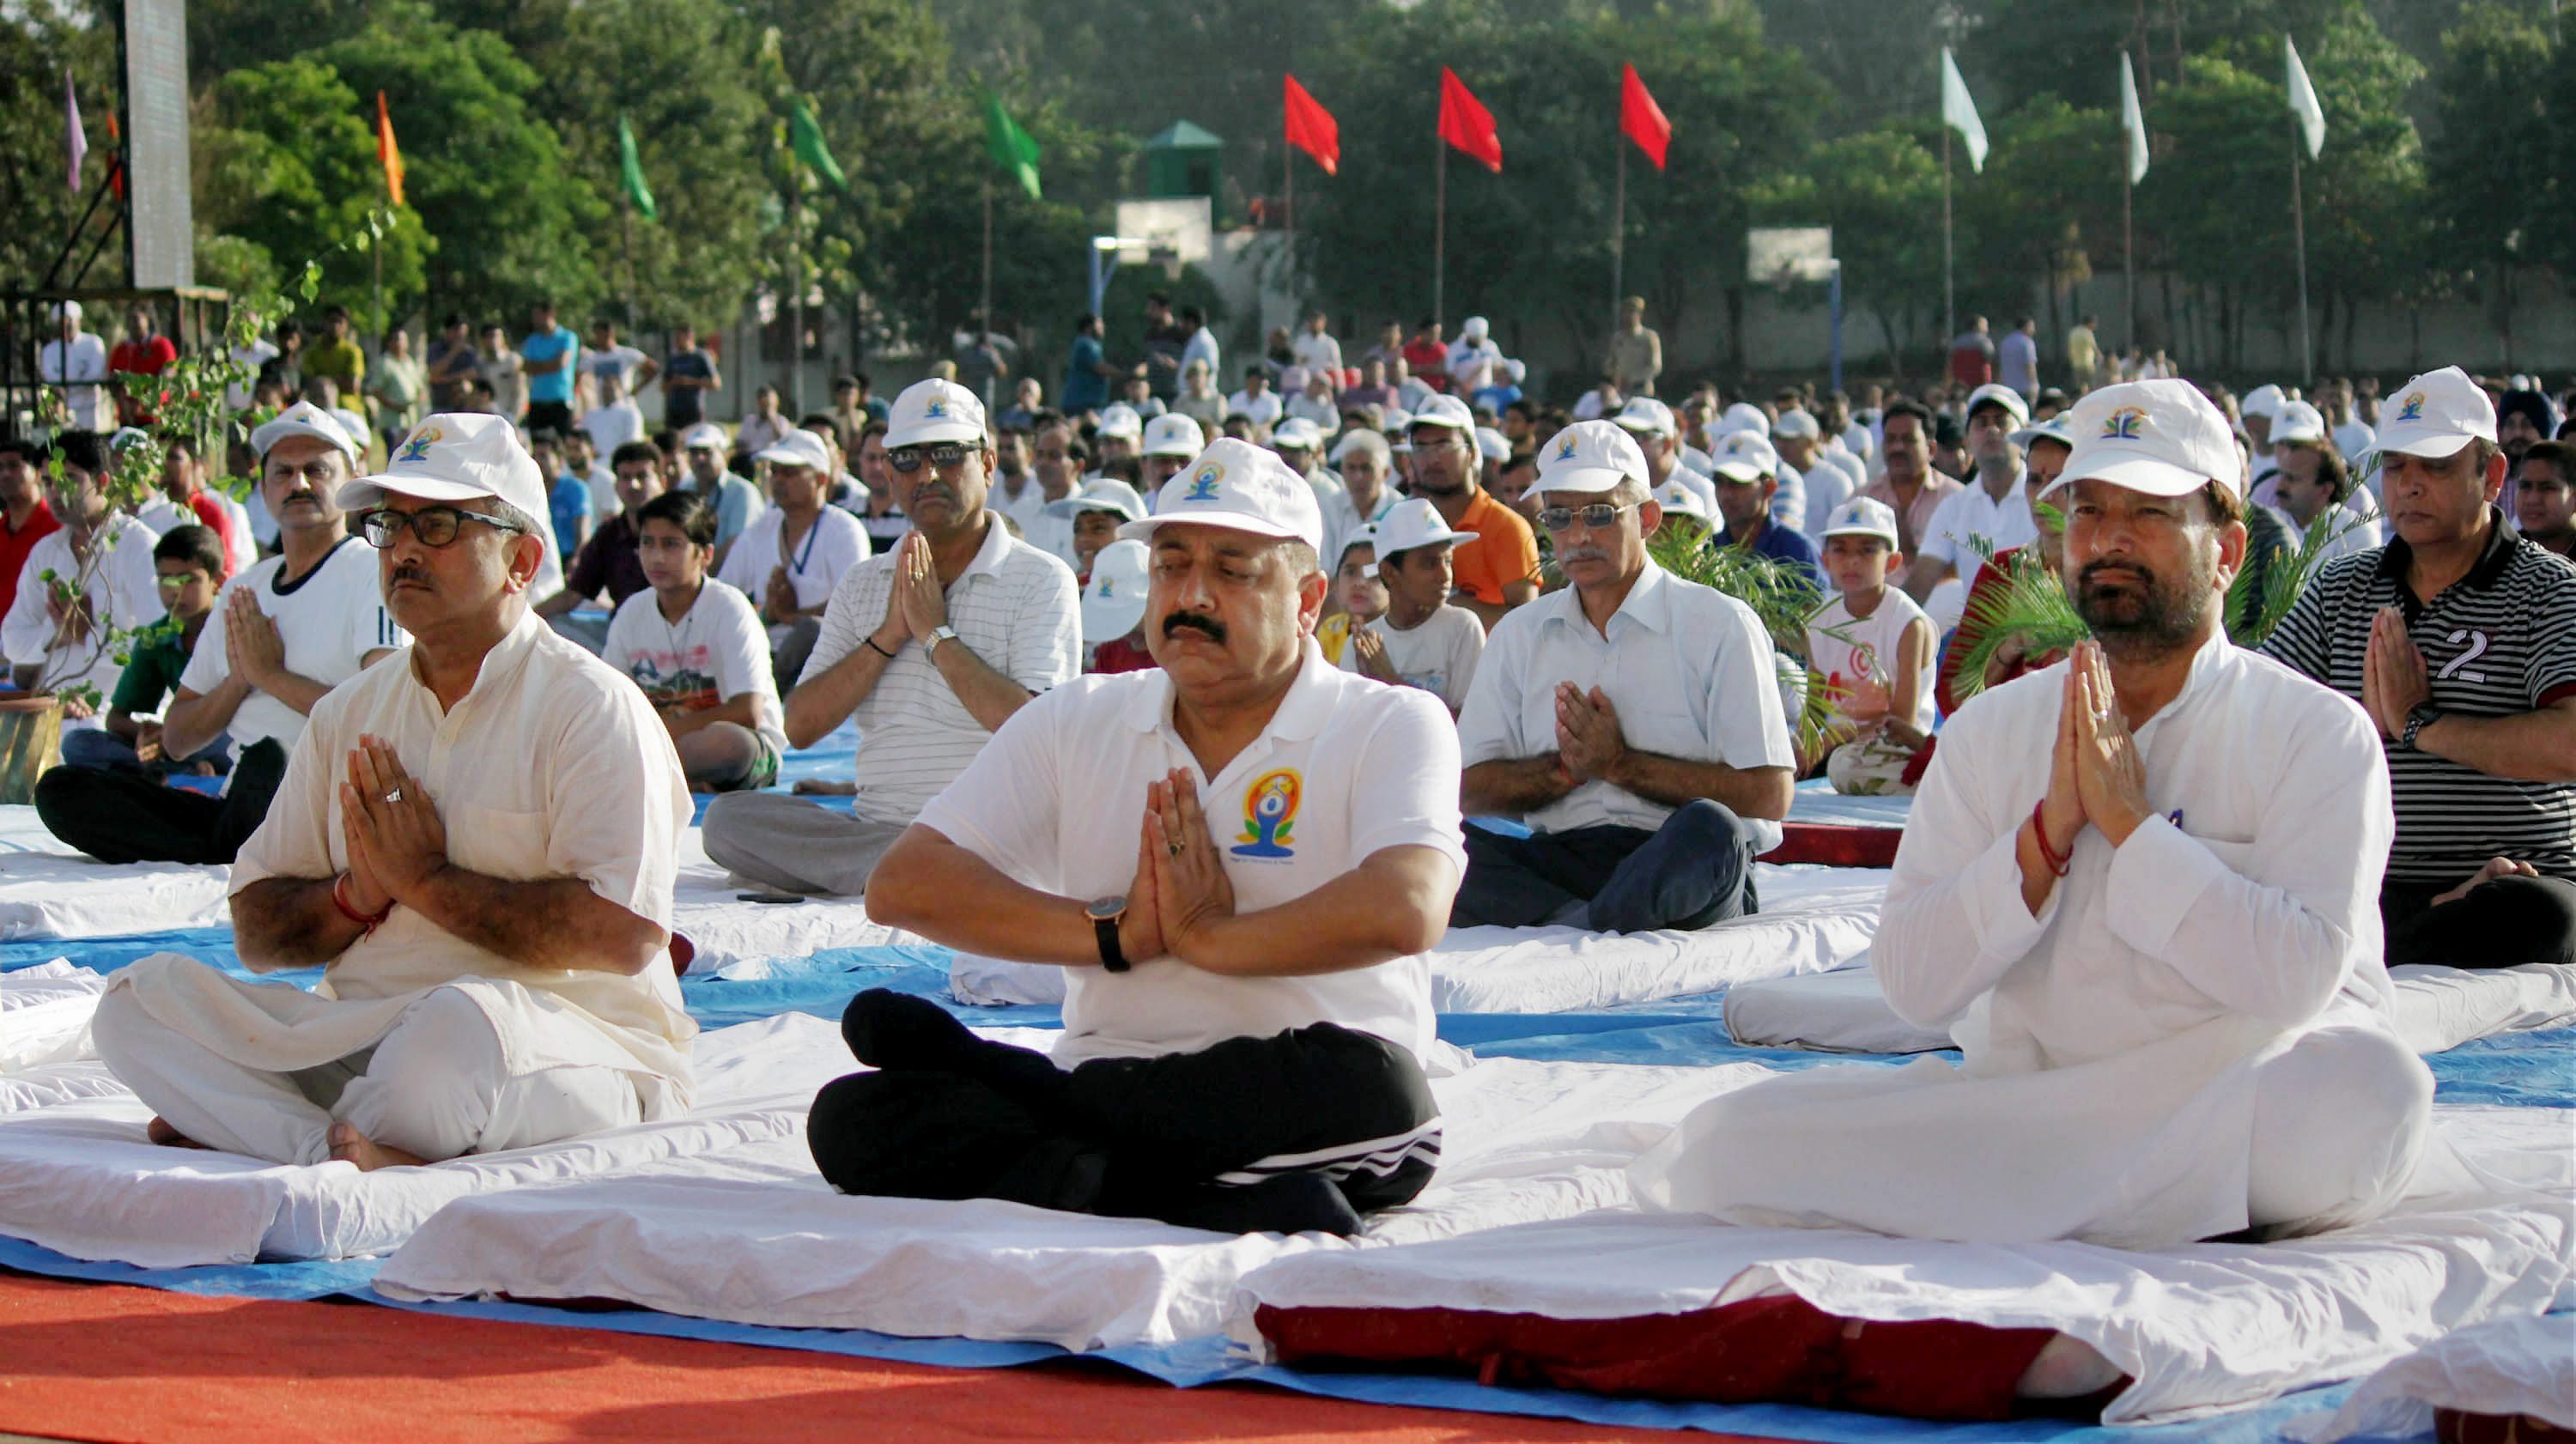 Jammu: Minister of State (MoS) in PMO Jitender Singh, Dy.Chief Minister Nirmal Singh and others perform Yoga during a mass yoga session on the International Day of Yoga 2015 in Jammu on Sunday. Credit: PTI Photo